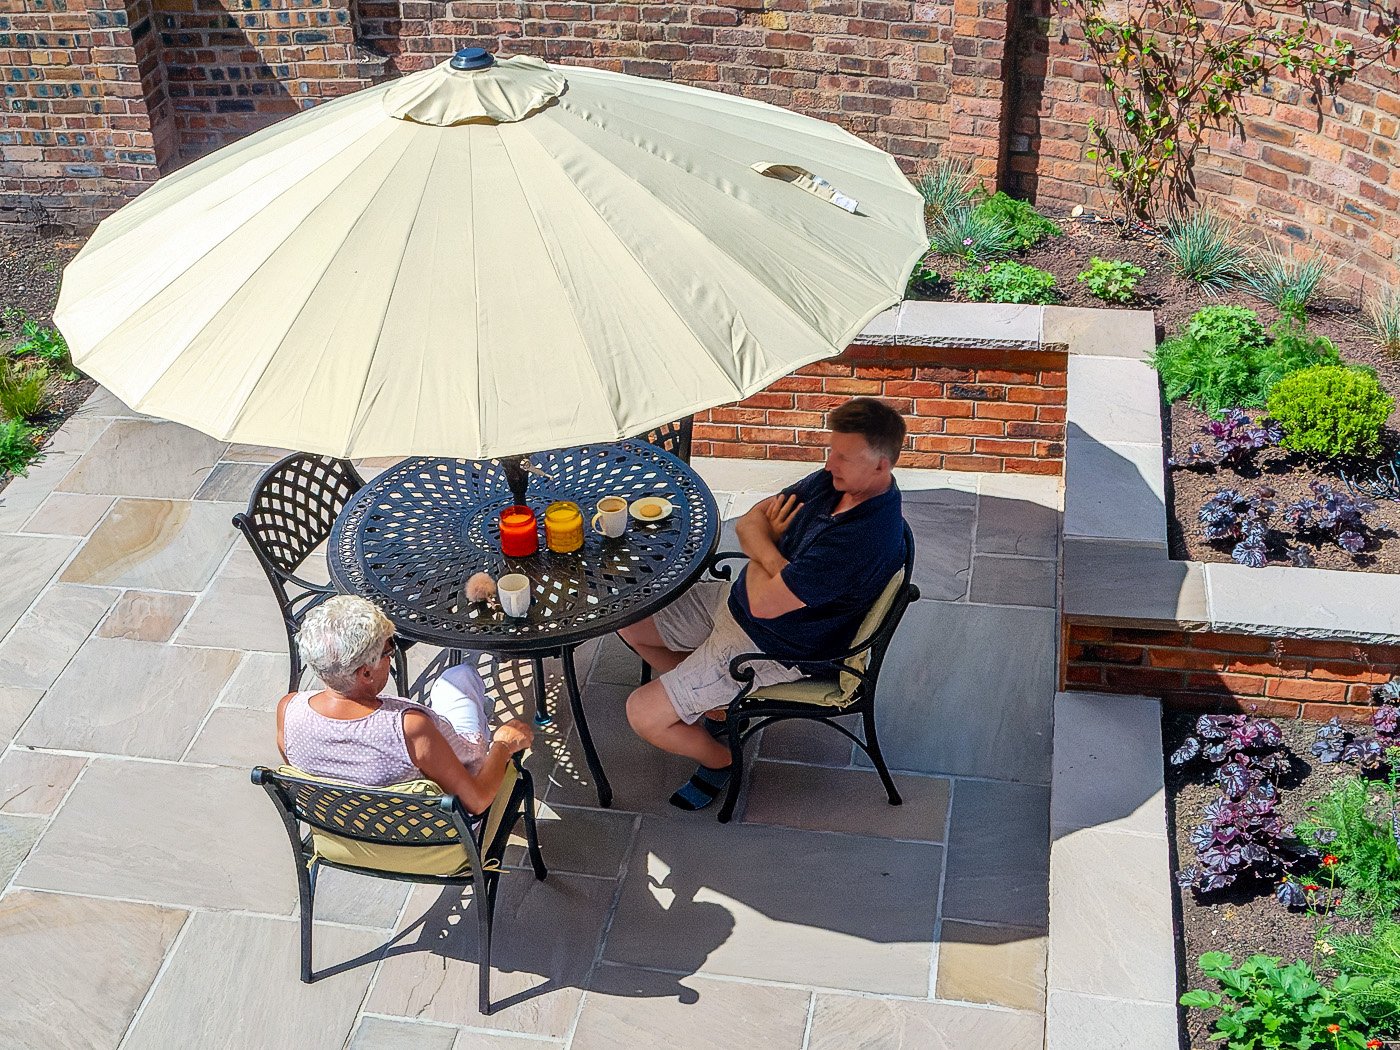 What makes a good patio layout?